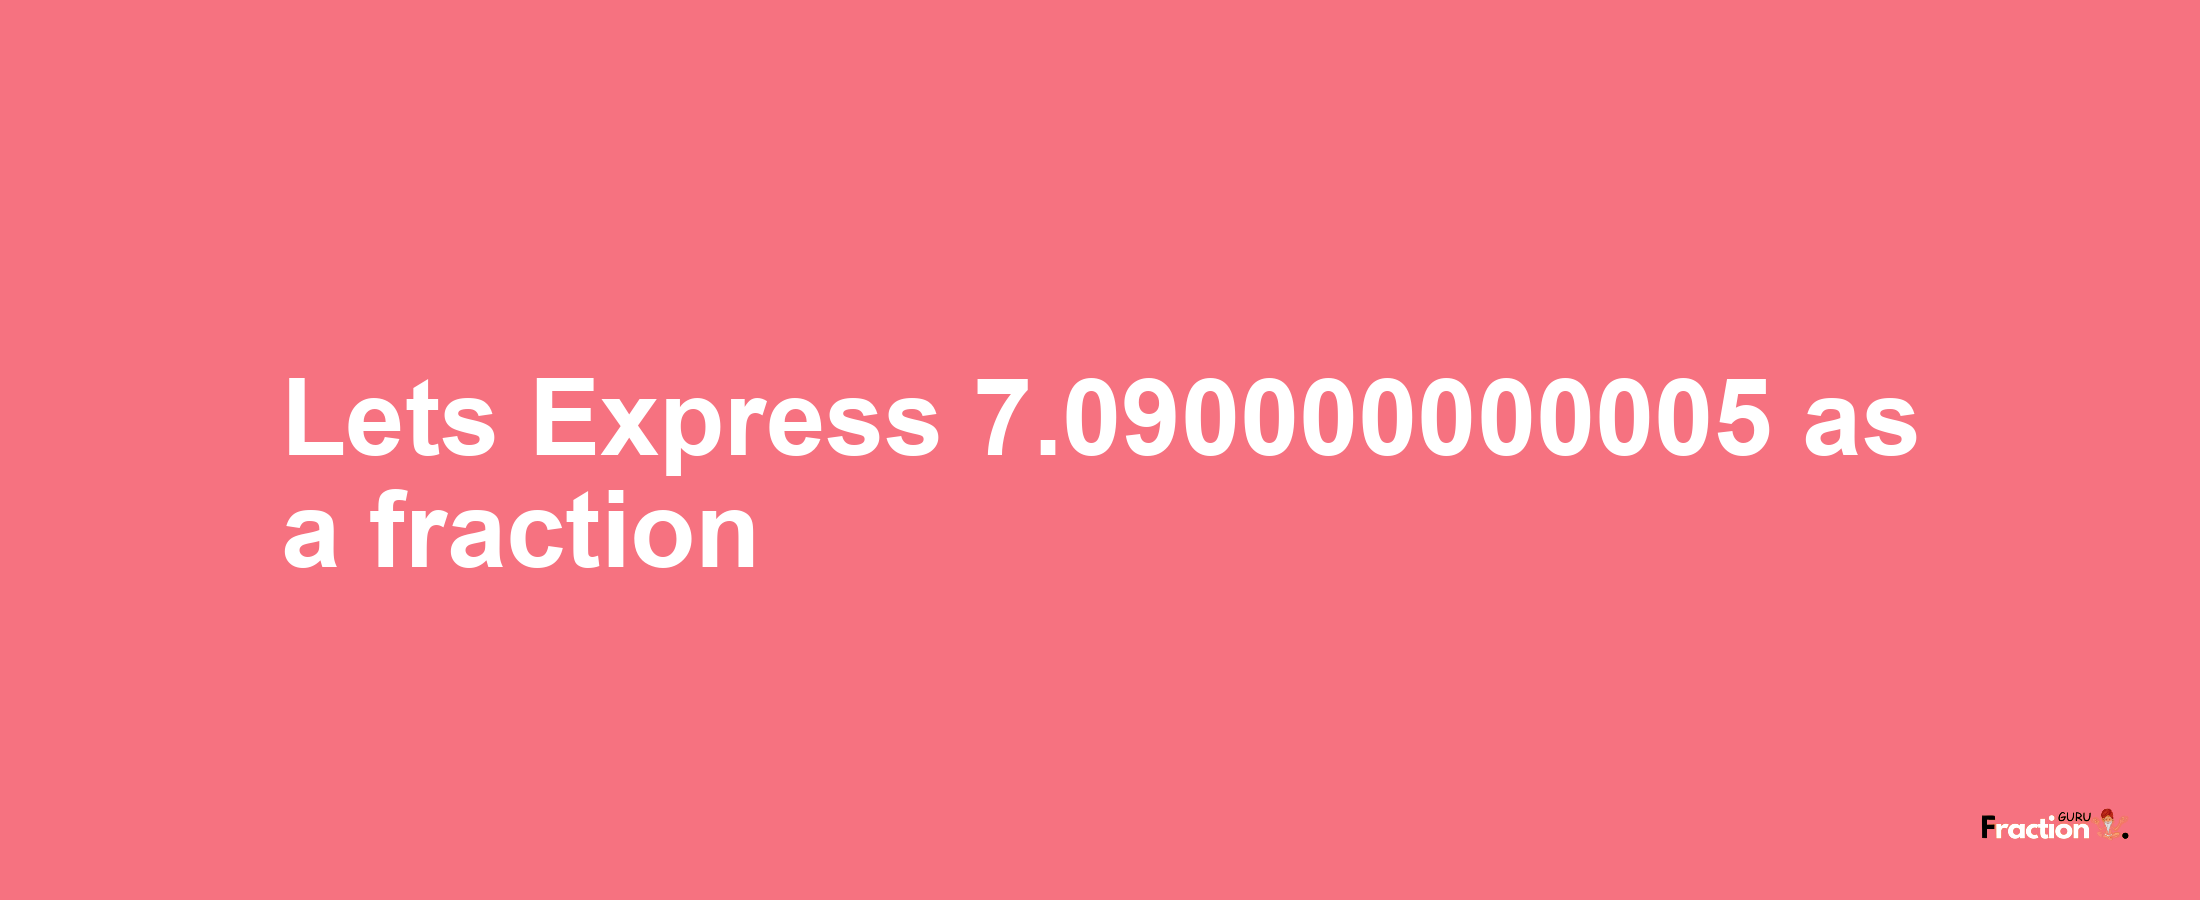 Lets Express 7.090000000005 as afraction